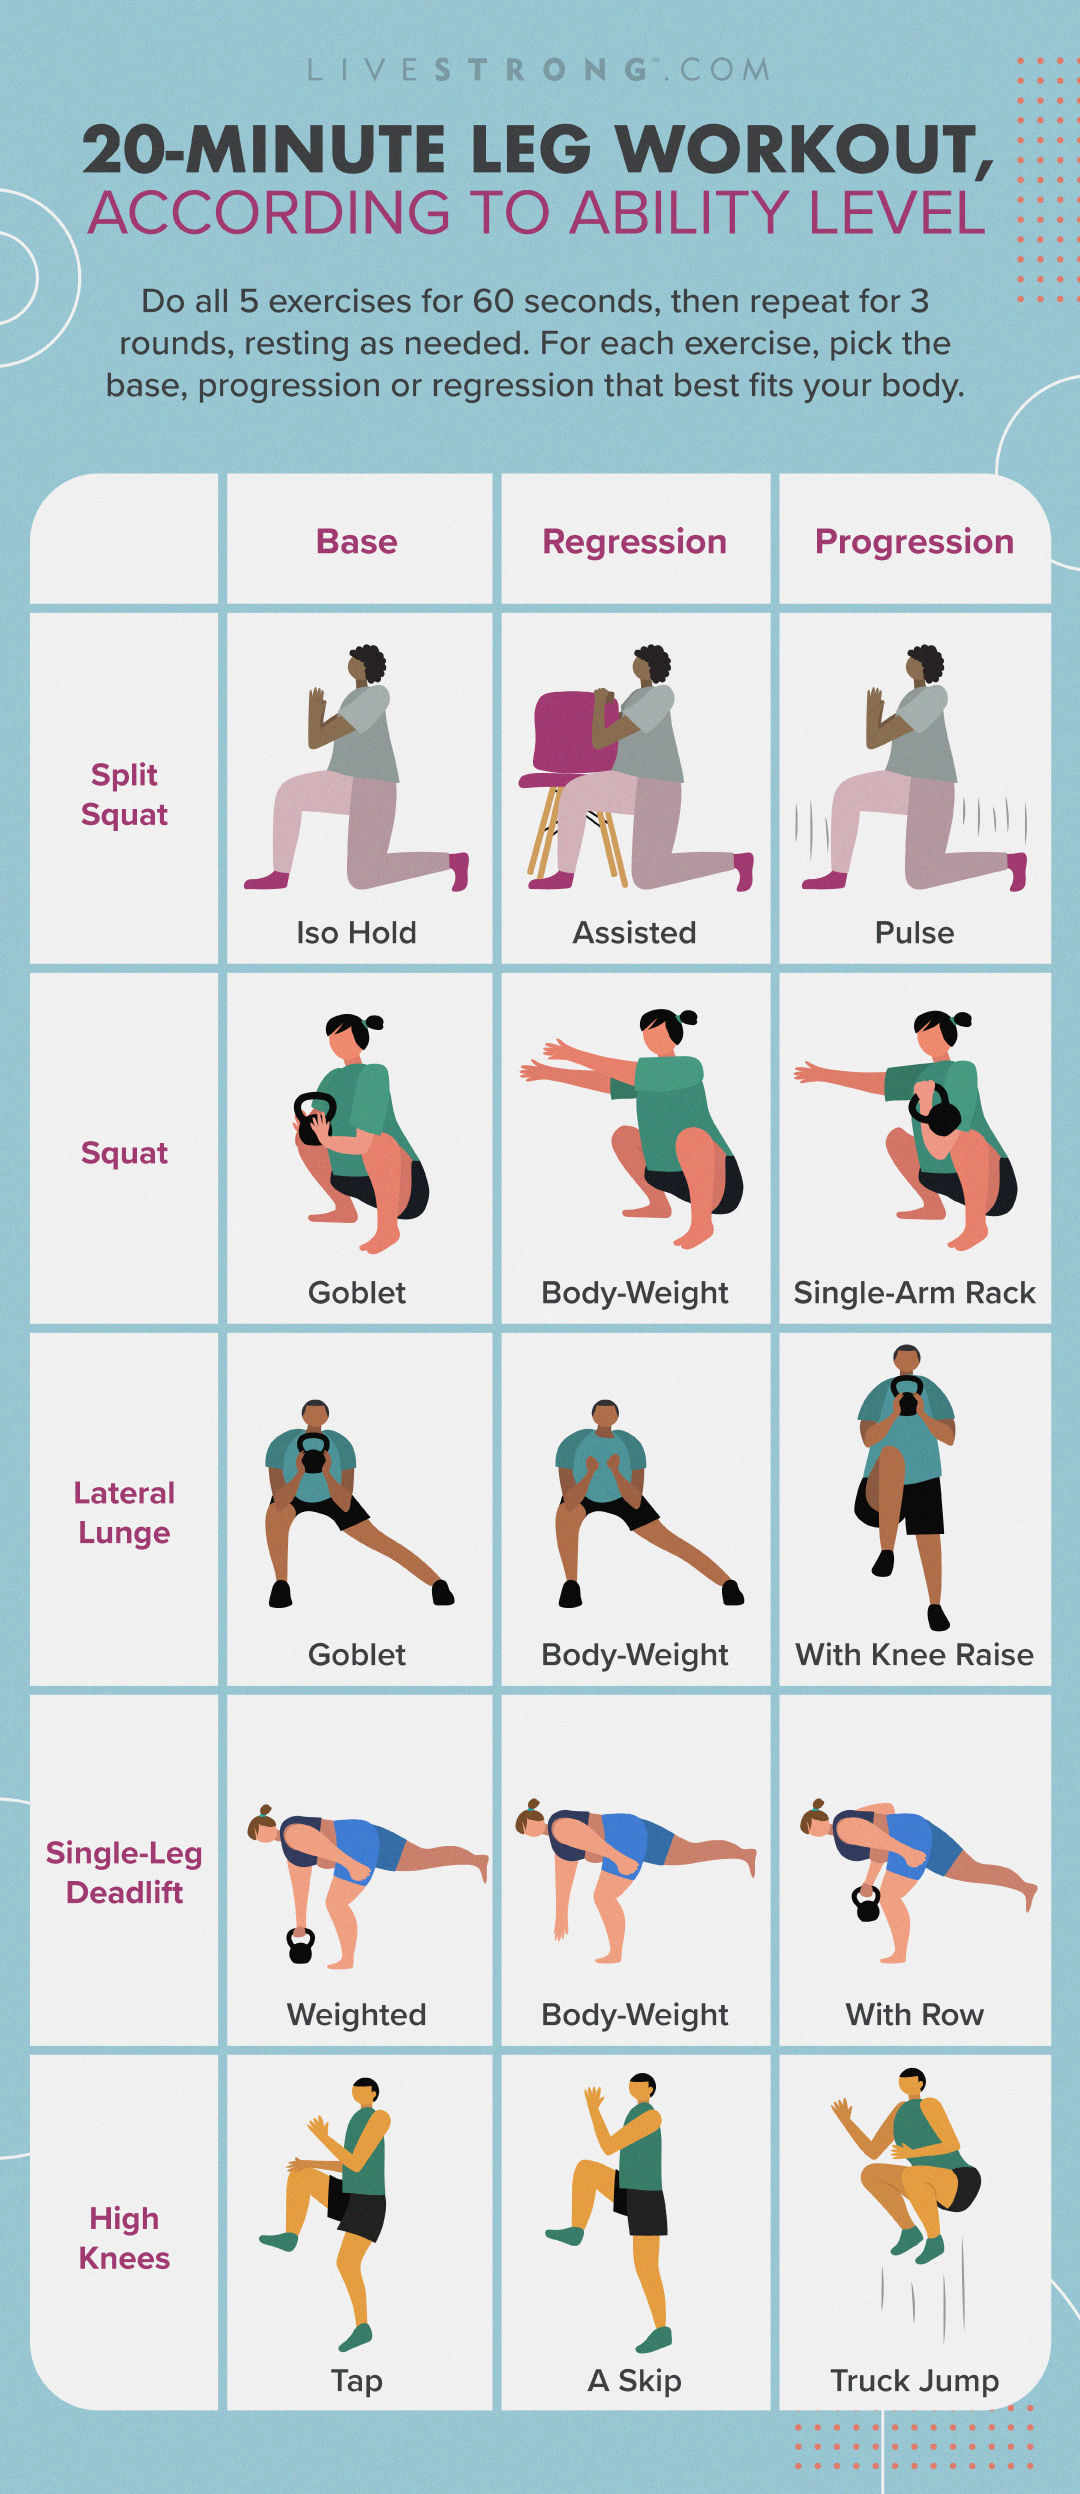 20-Minute Leg Workout, According to Ability Level